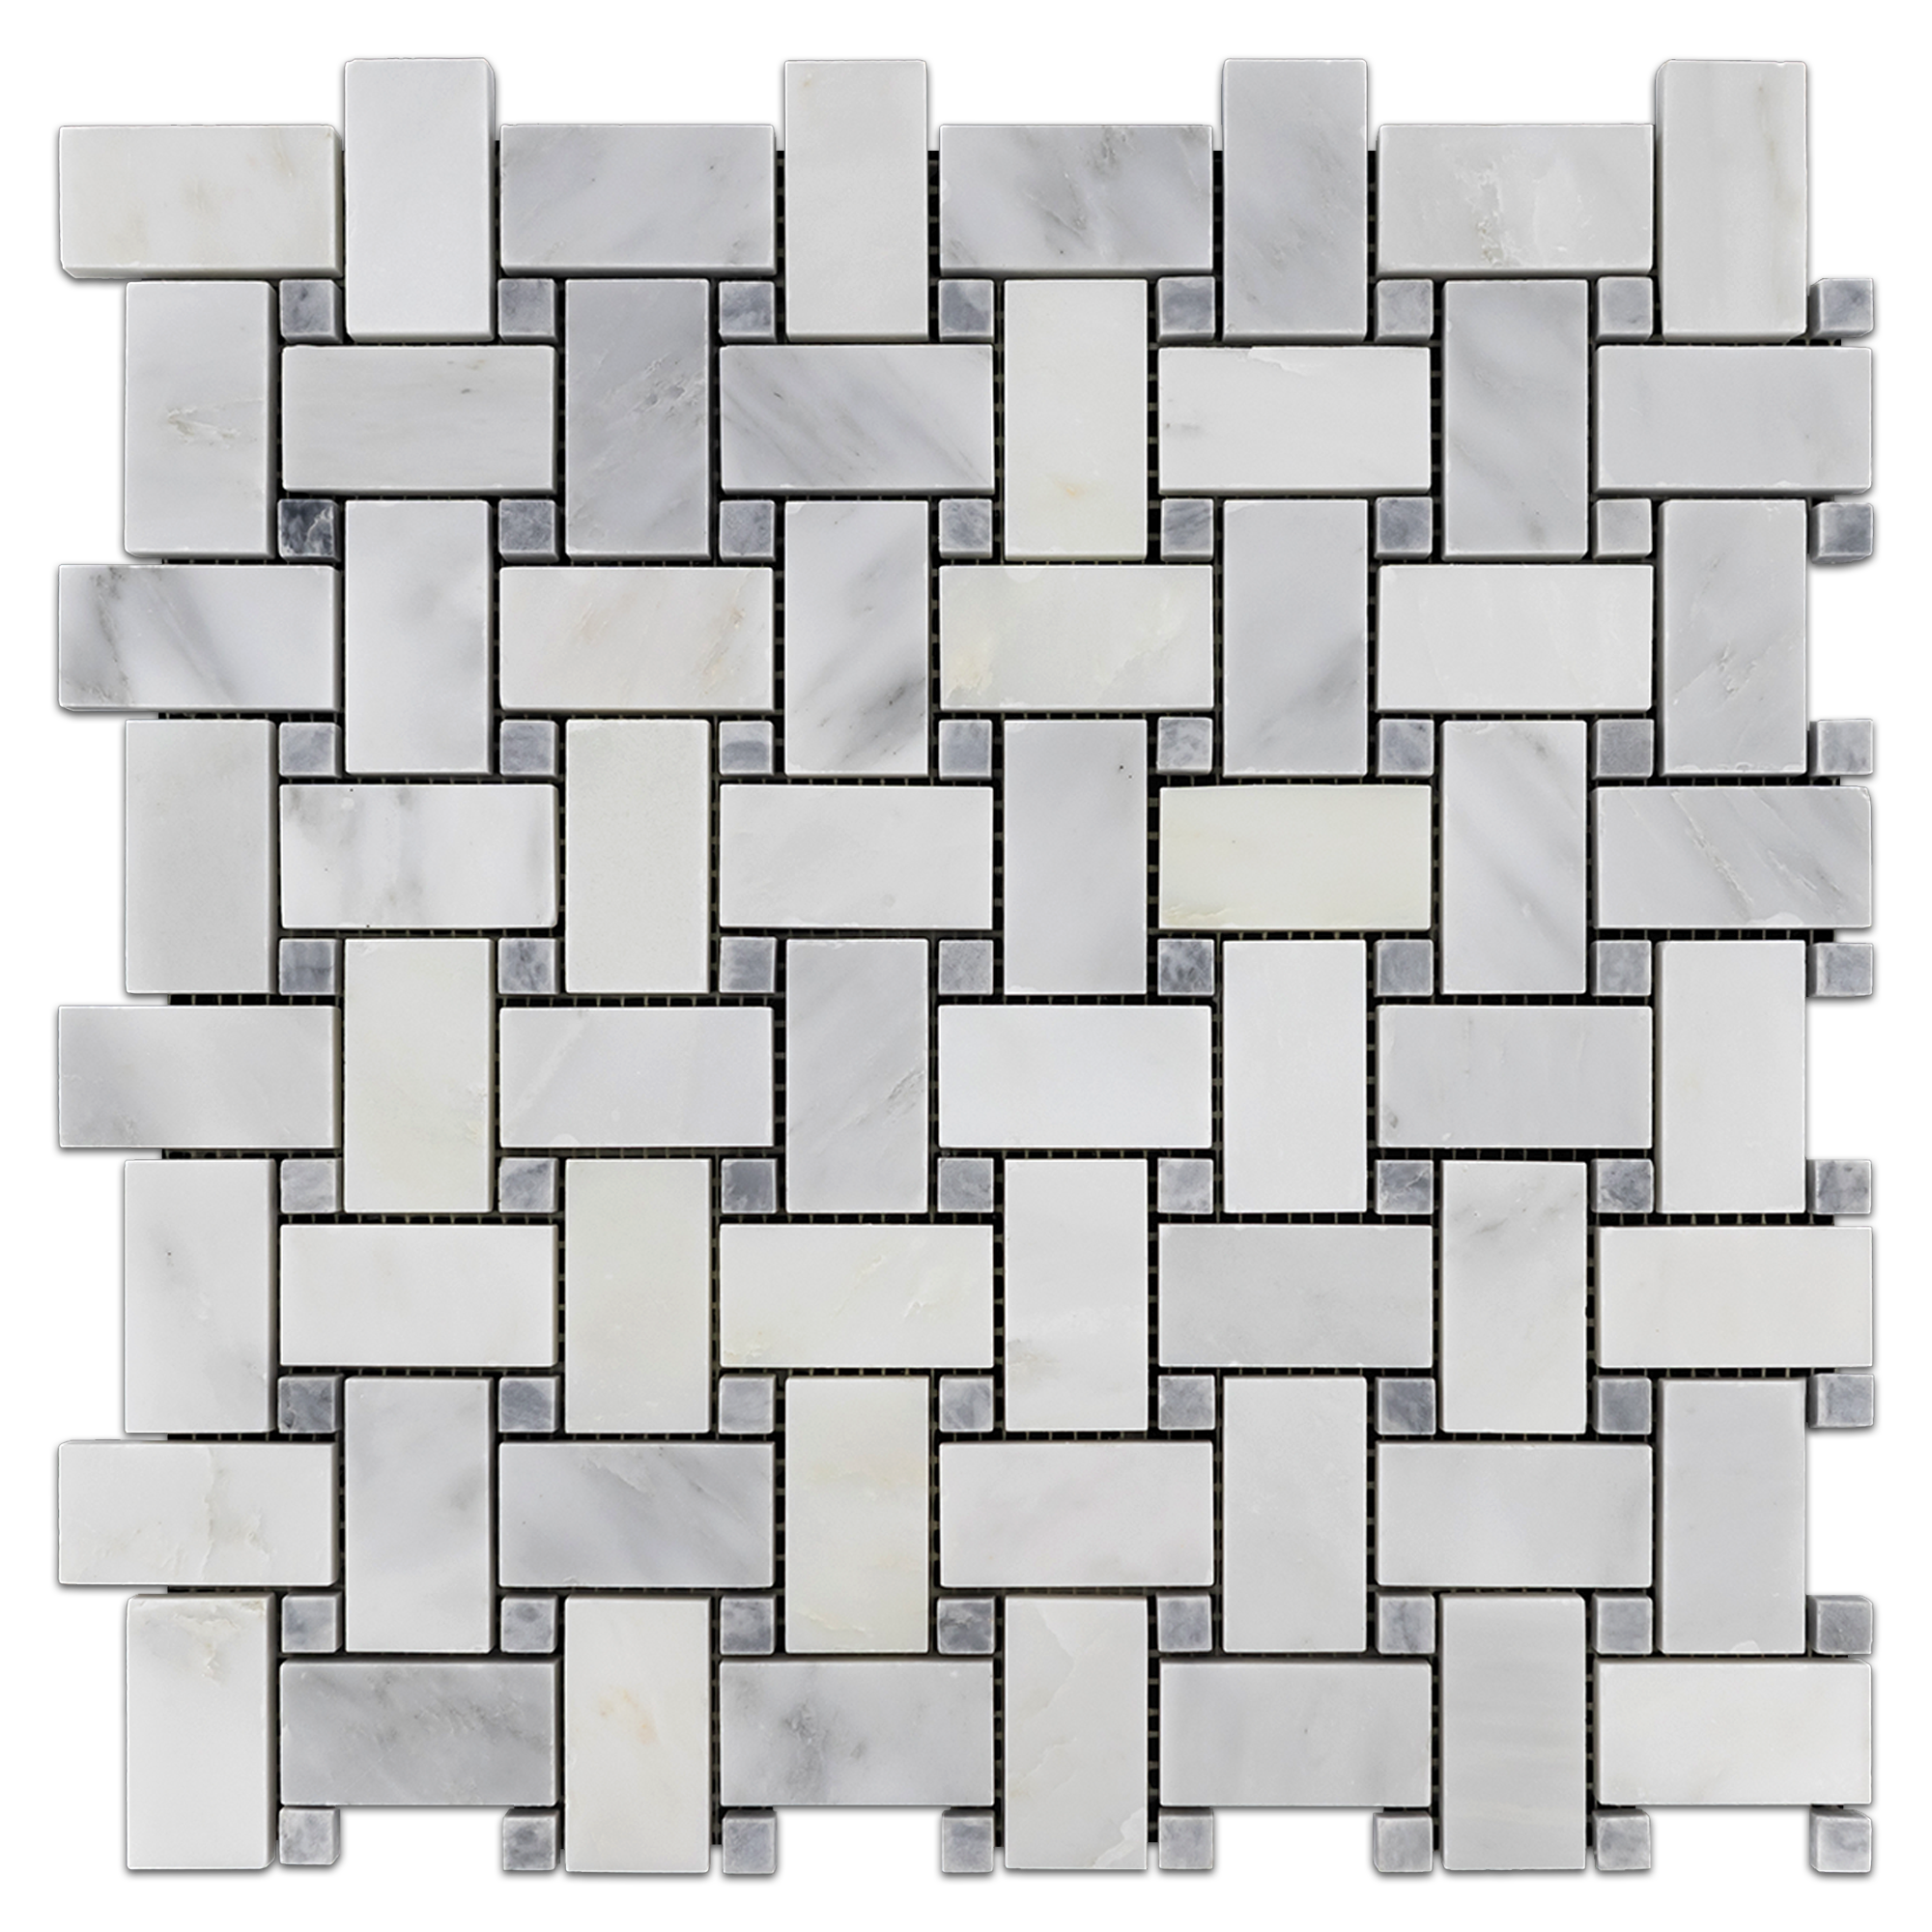 Elon Pearl White Pacific Gray Marble Stone Blend 3/8 Basketweave Field Mosaic 12x12x0.375 Honed - Surface Group International Product